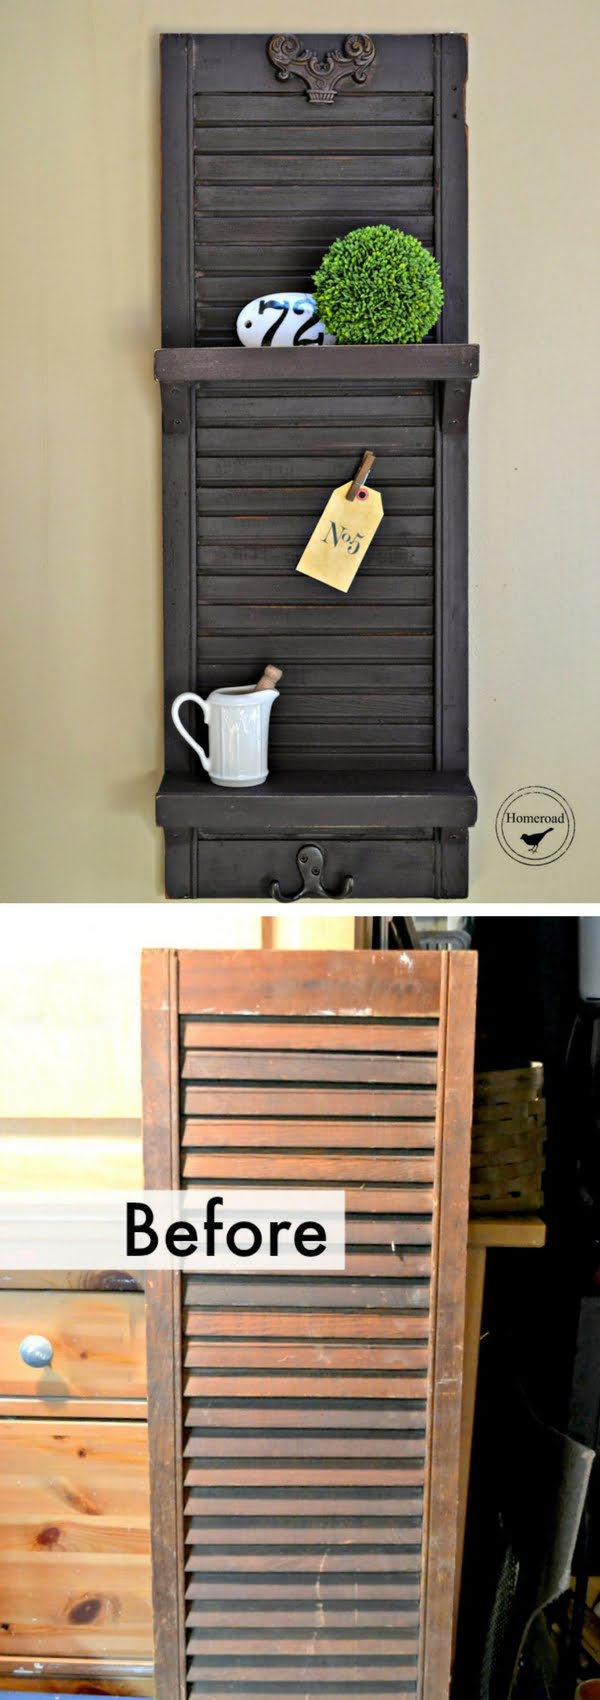 How to build a DIY shelf from old shutters 